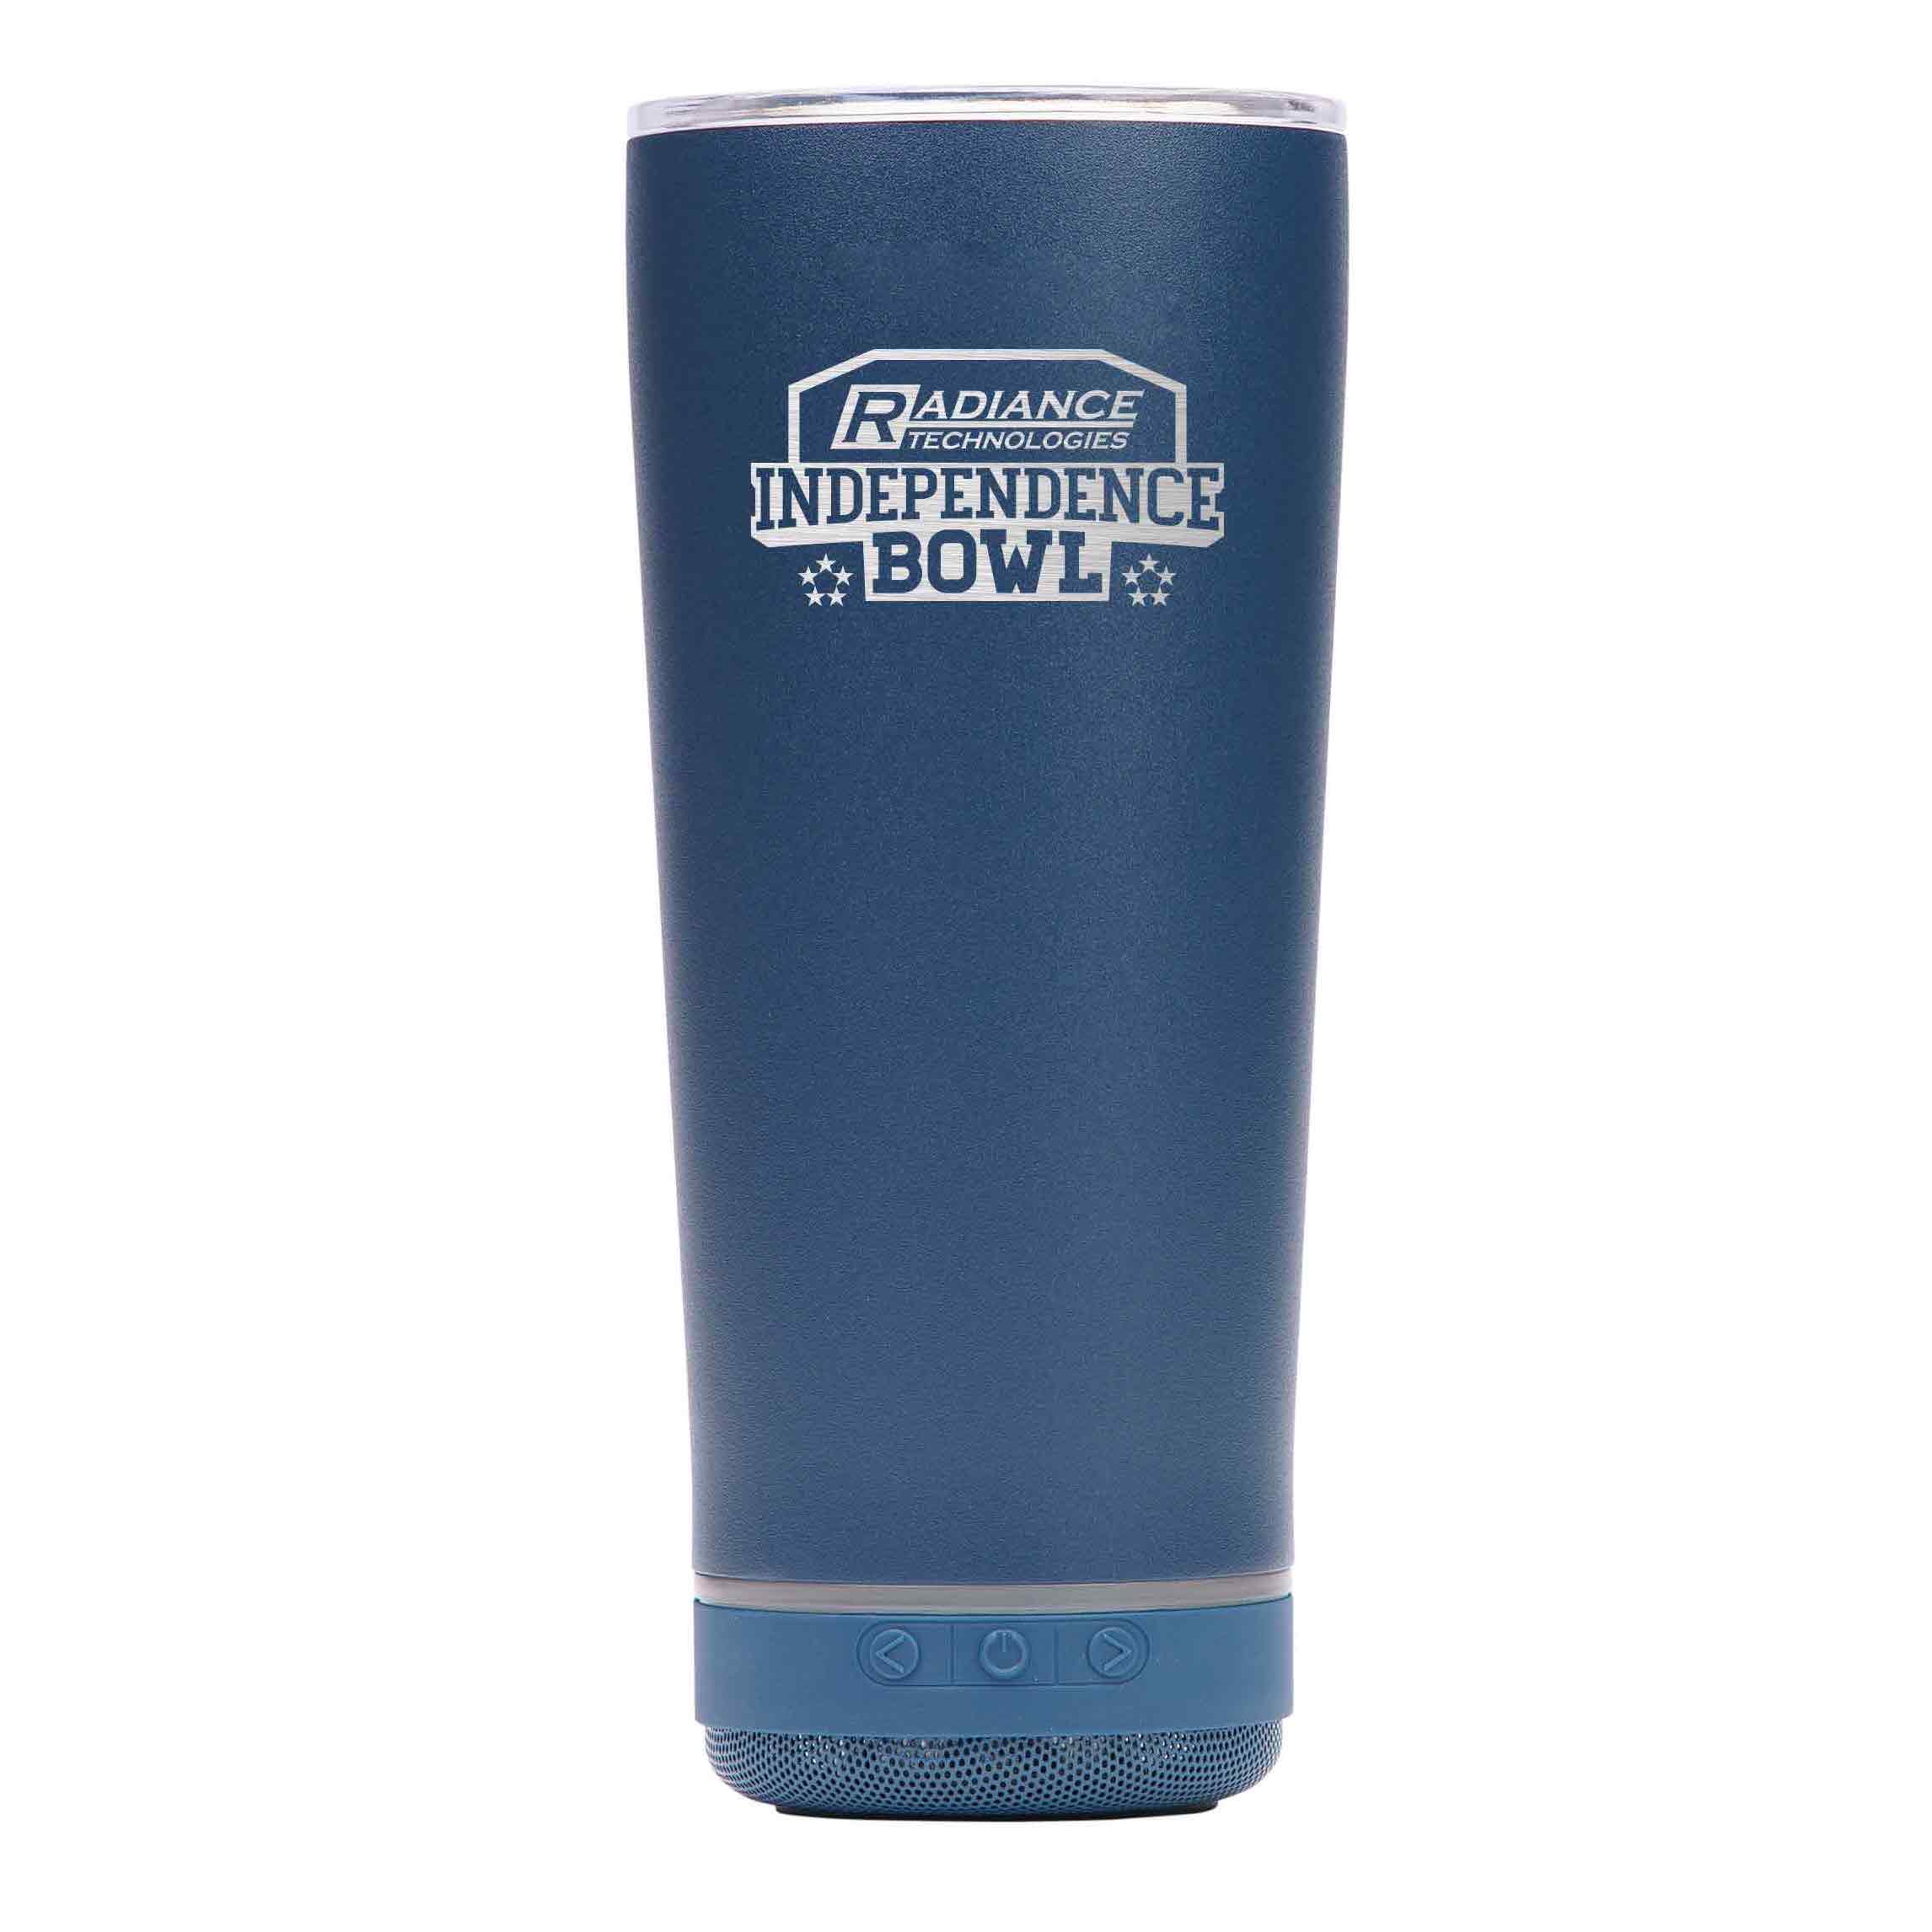 ****Radiance Technogies Independence Bowl LIMITED EDITION VIBE 18oz TUMBLER WITH BLUETOOTH SPEAKER!!!****